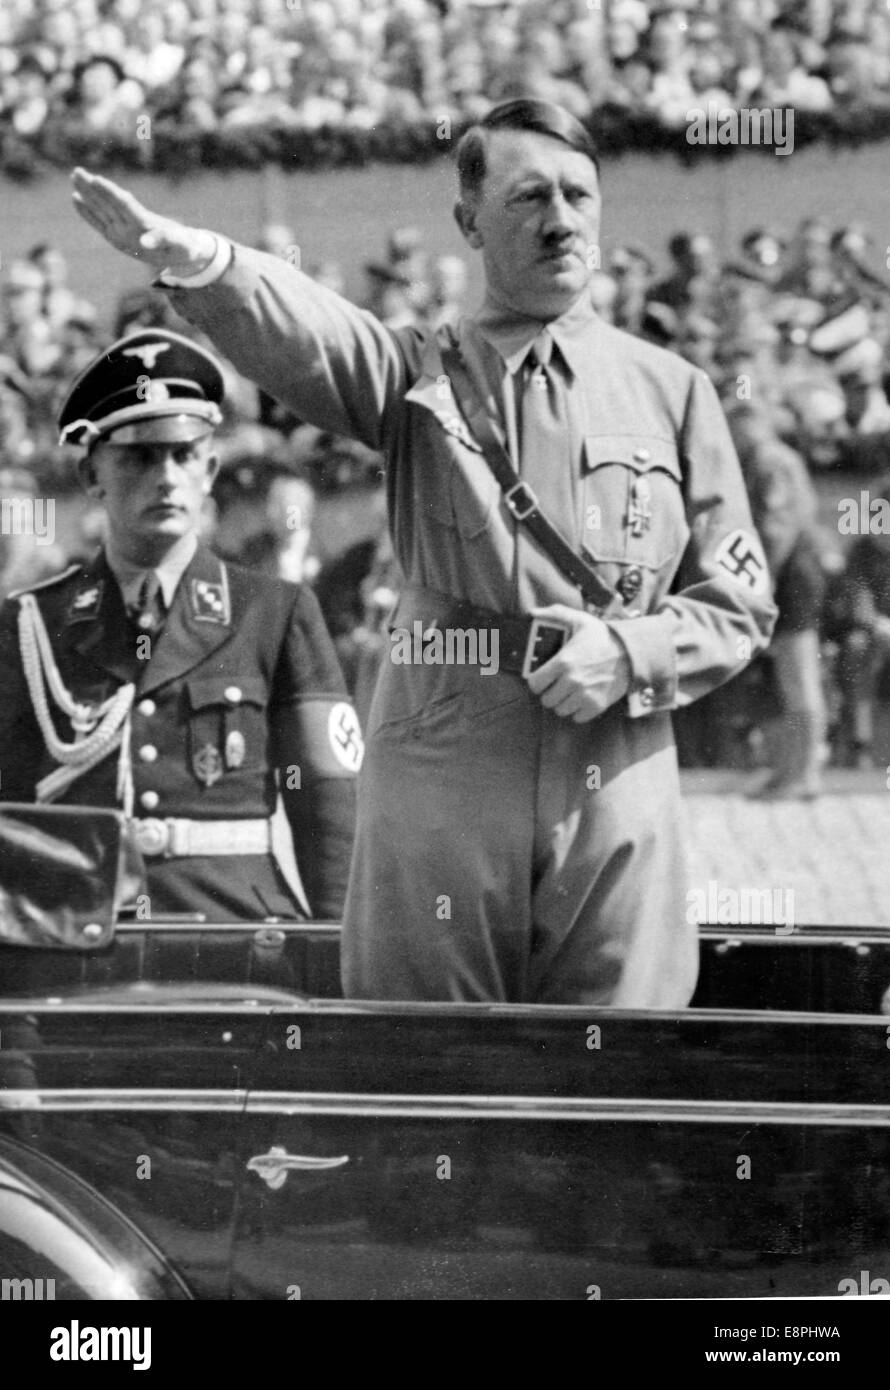 Nuremberg Rally 1938 in Nuremberg, Germany - Adolf Hitler stands in a car and takes the salute during a march-past of groups of the NSDAP and the Sturmabteilung (SA) on Adolf-Hitler-Square. (Flaws in quality due to the historic picture copy) Fotoarchiv für Zeitgeschichtee - NO WIRE SERVICE - Stock Photo